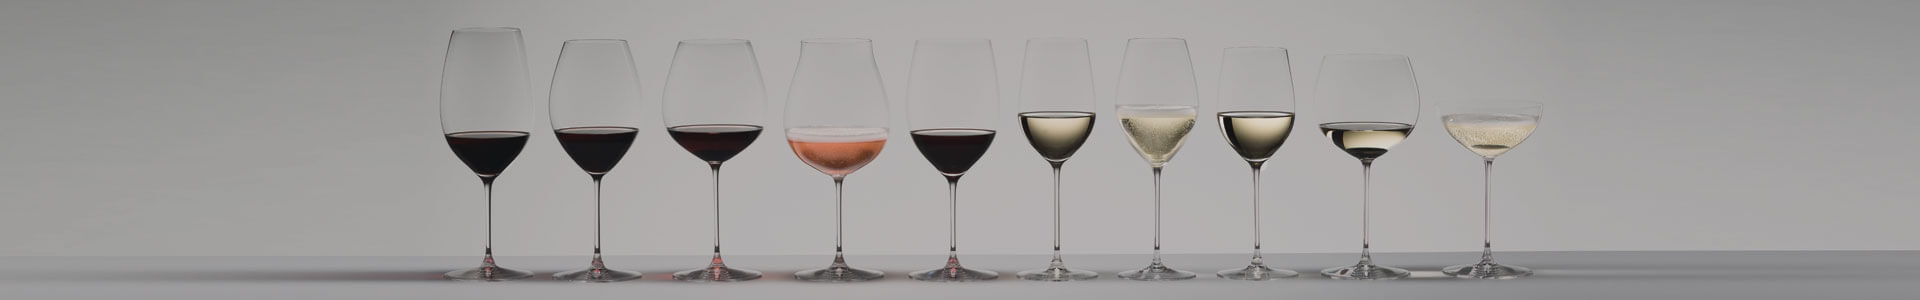 Numerous wine glasses and other stemware from the Riedel Veritas series stand next to each other.